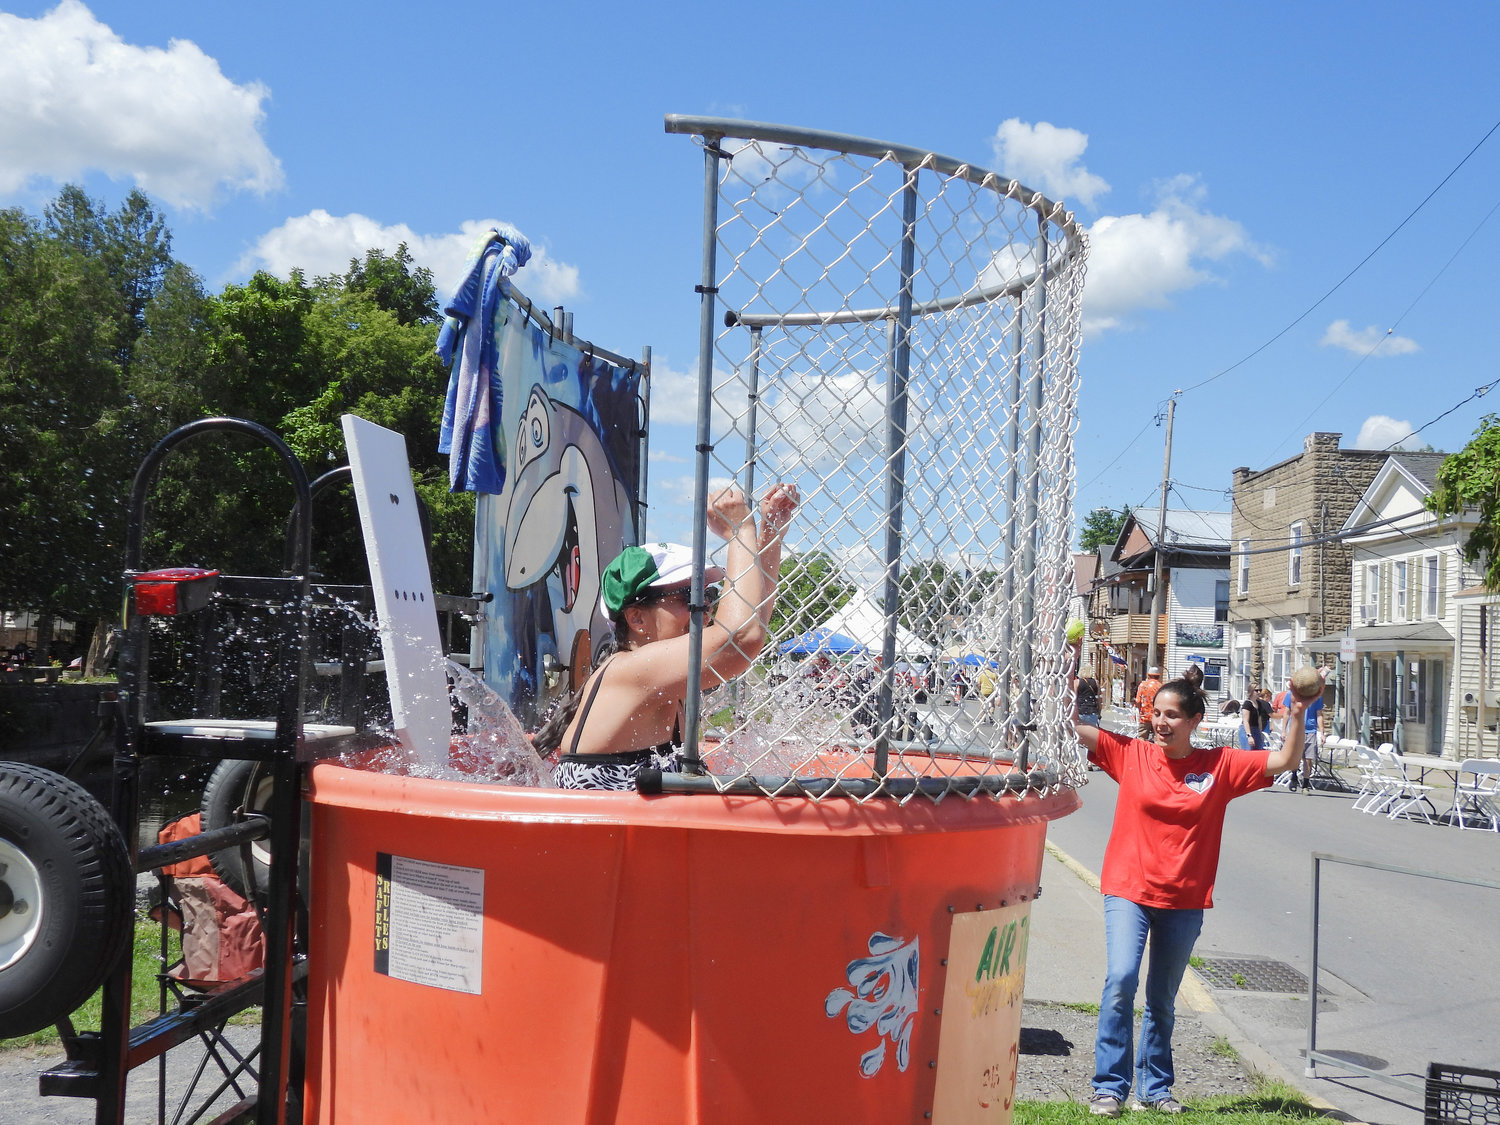 Canastota Mayor Rosanne Warner spends some time in the dunk tank at the Canastota Italian Heritage Festival to the delight of festival-goers and the mayor herself.